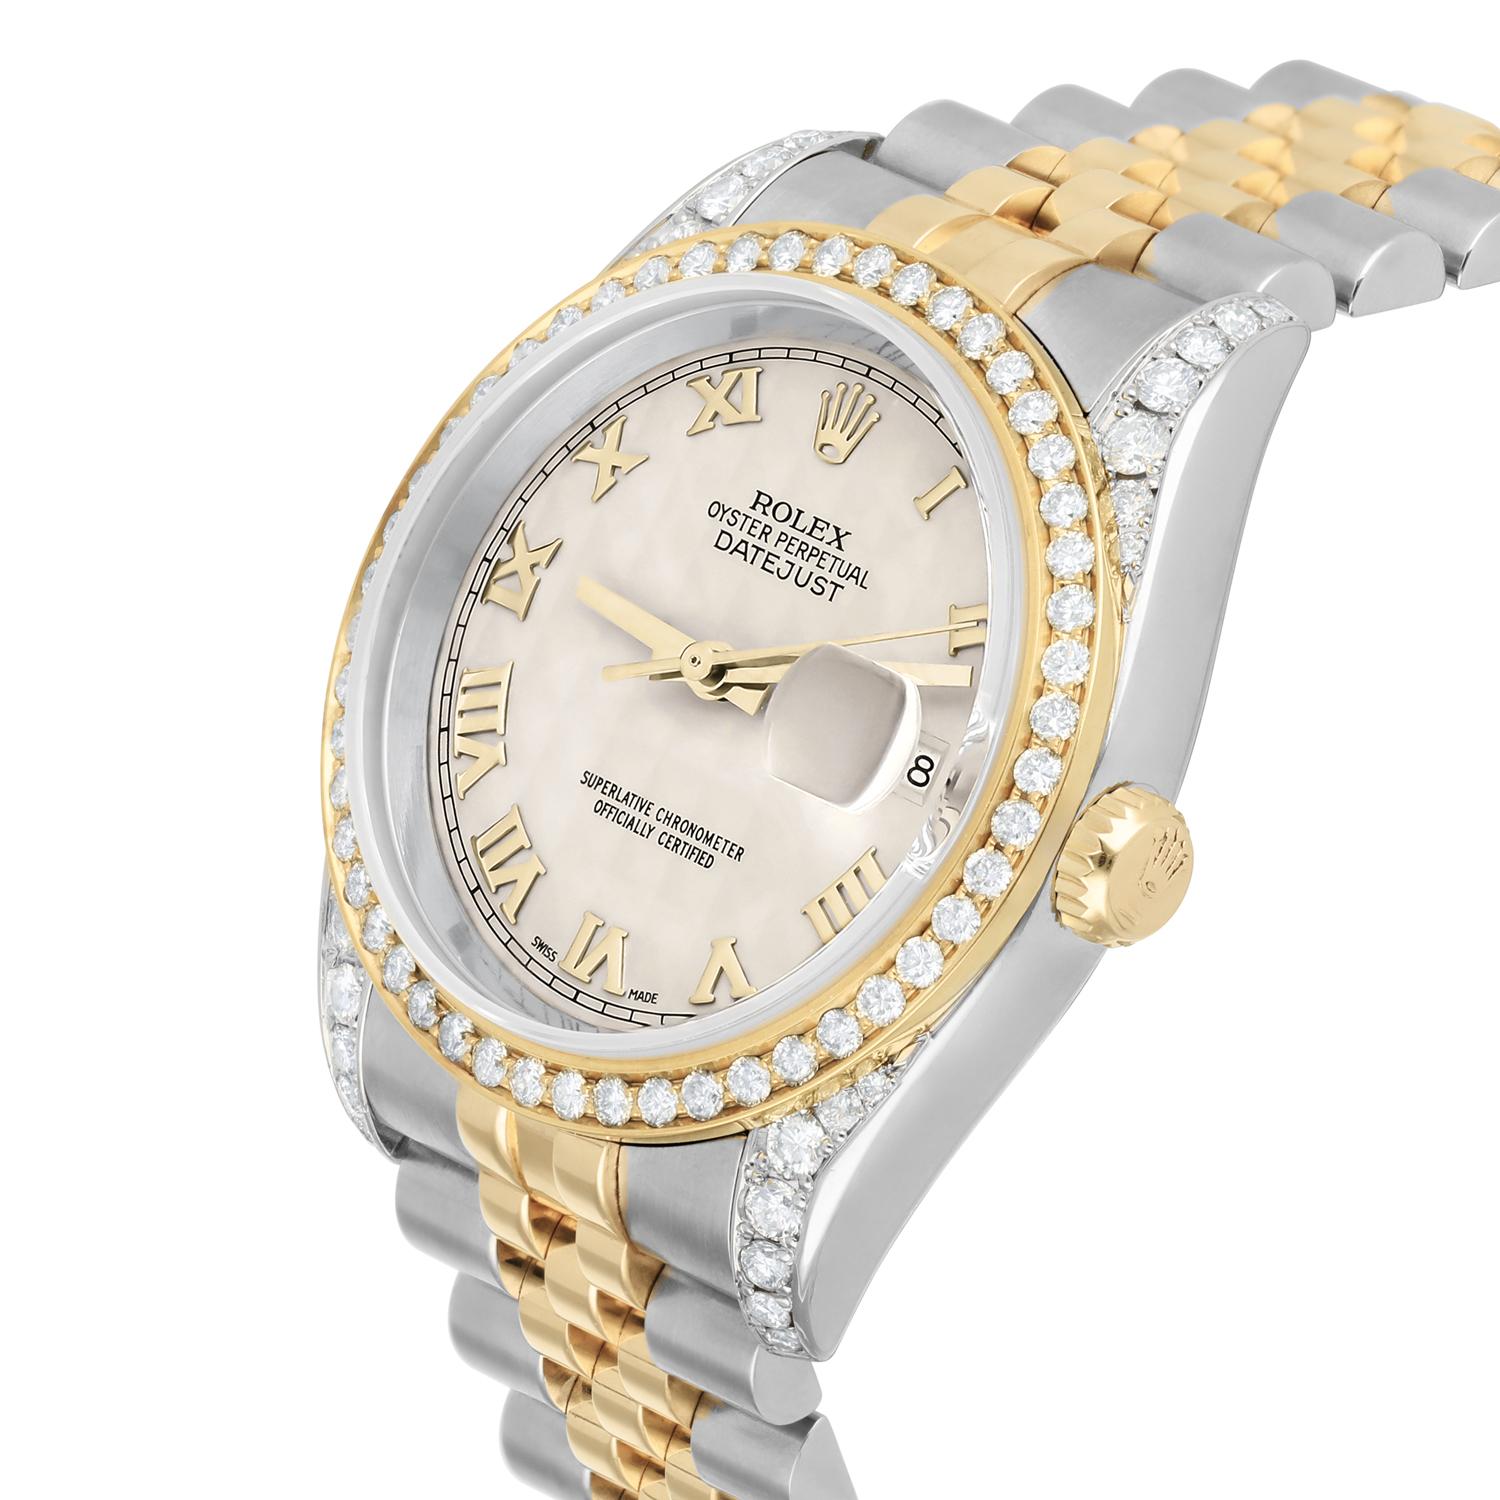 Modern Rolex Datejust 36 Diamond Gold and Steel 116233 Ivory Pyramid Dial Jubilee Watch For Sale